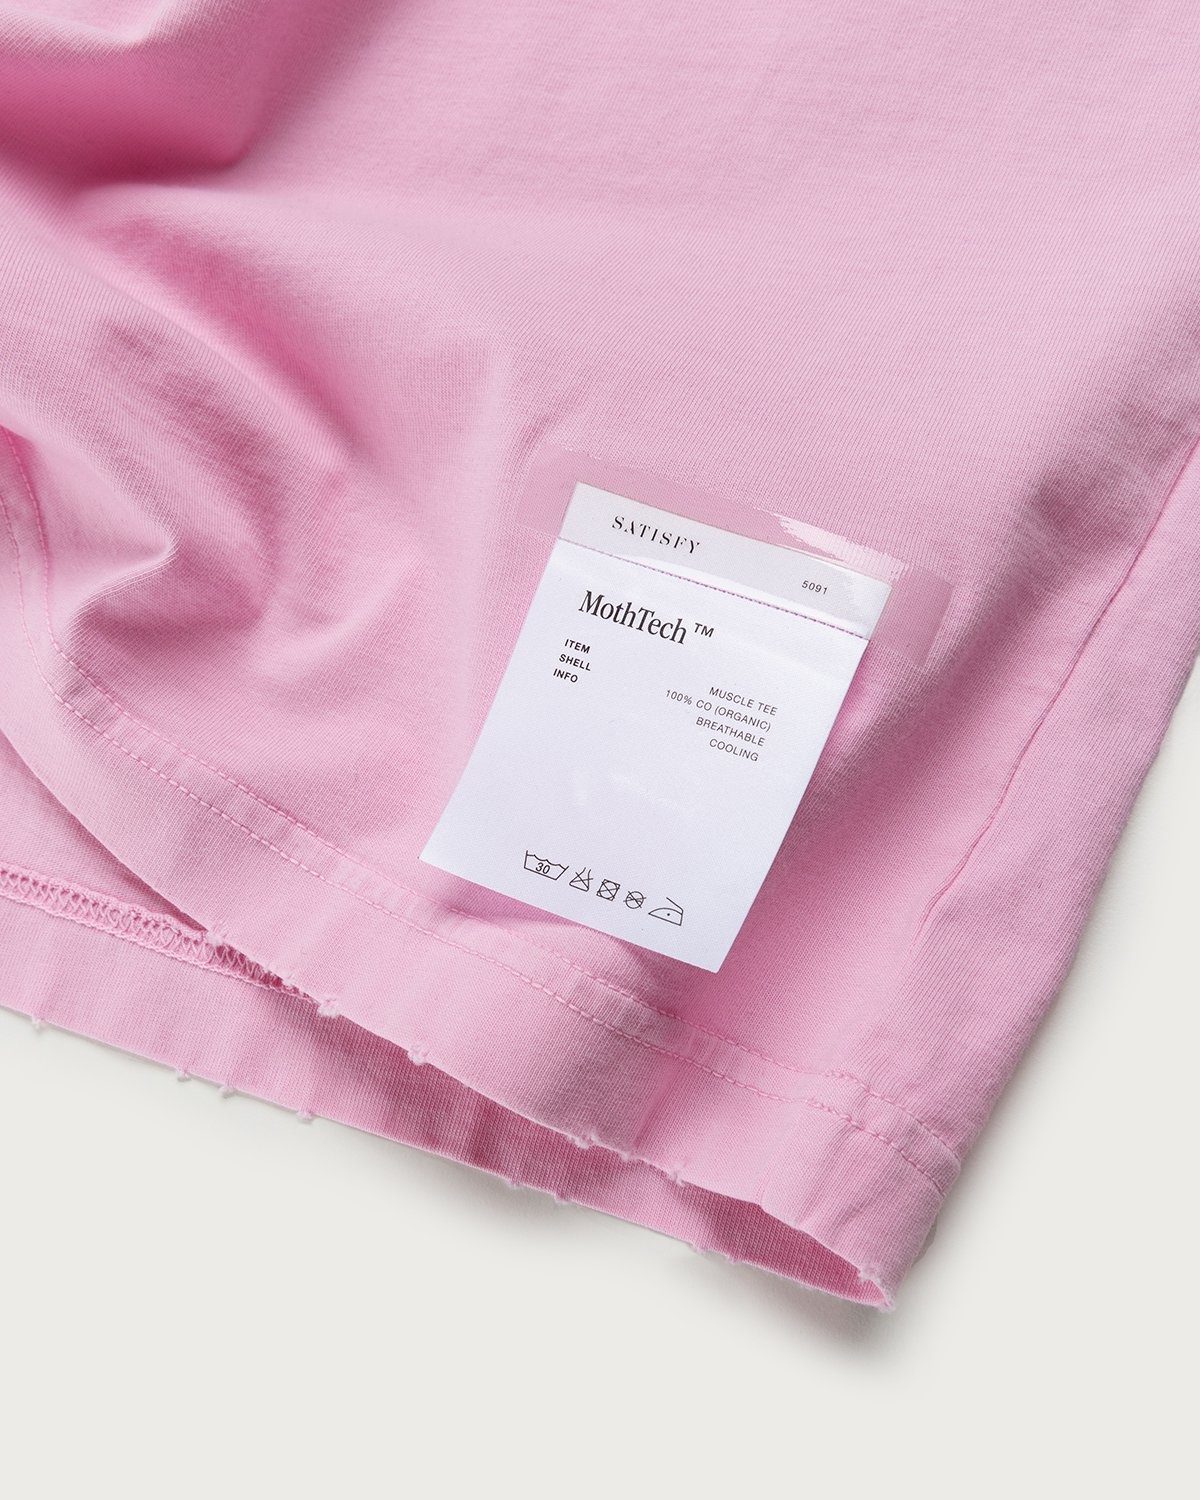 Satisfy x Highsnobiety – HS Sports Balance Muscle Tee Pink - T-shirts - Pink - Image 5